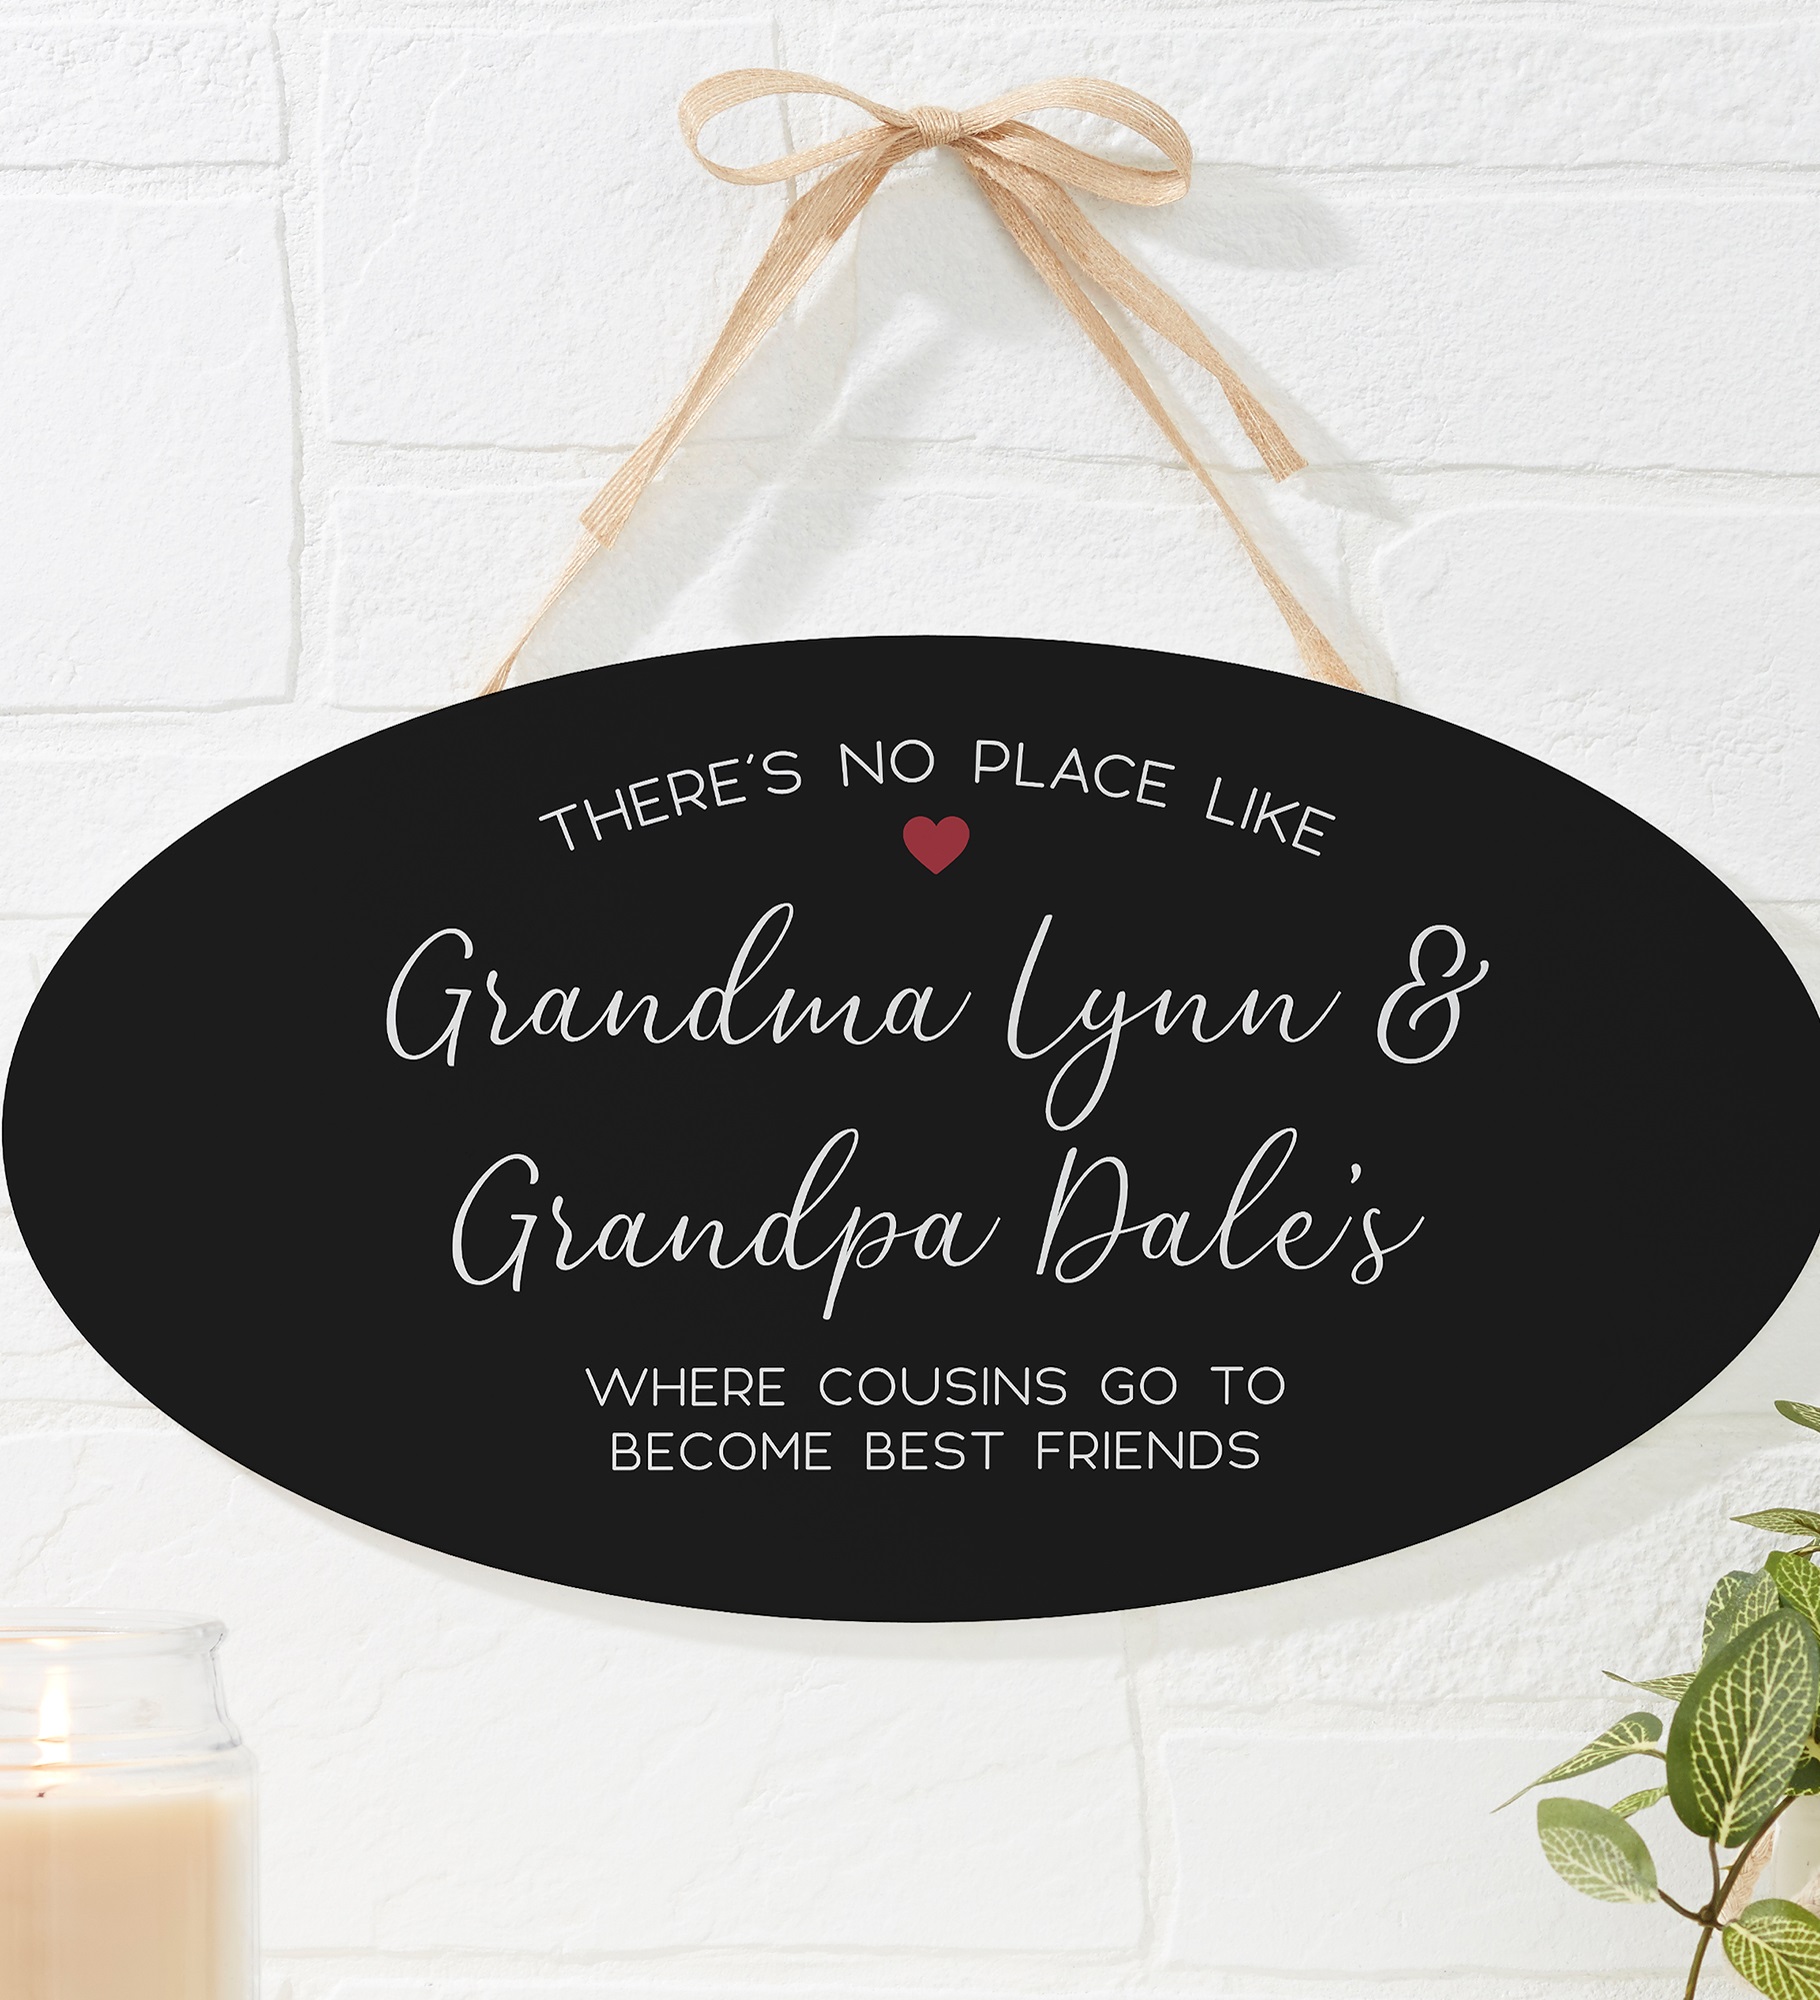 No Place Like Personalized Grandparents Oval Wood Sign